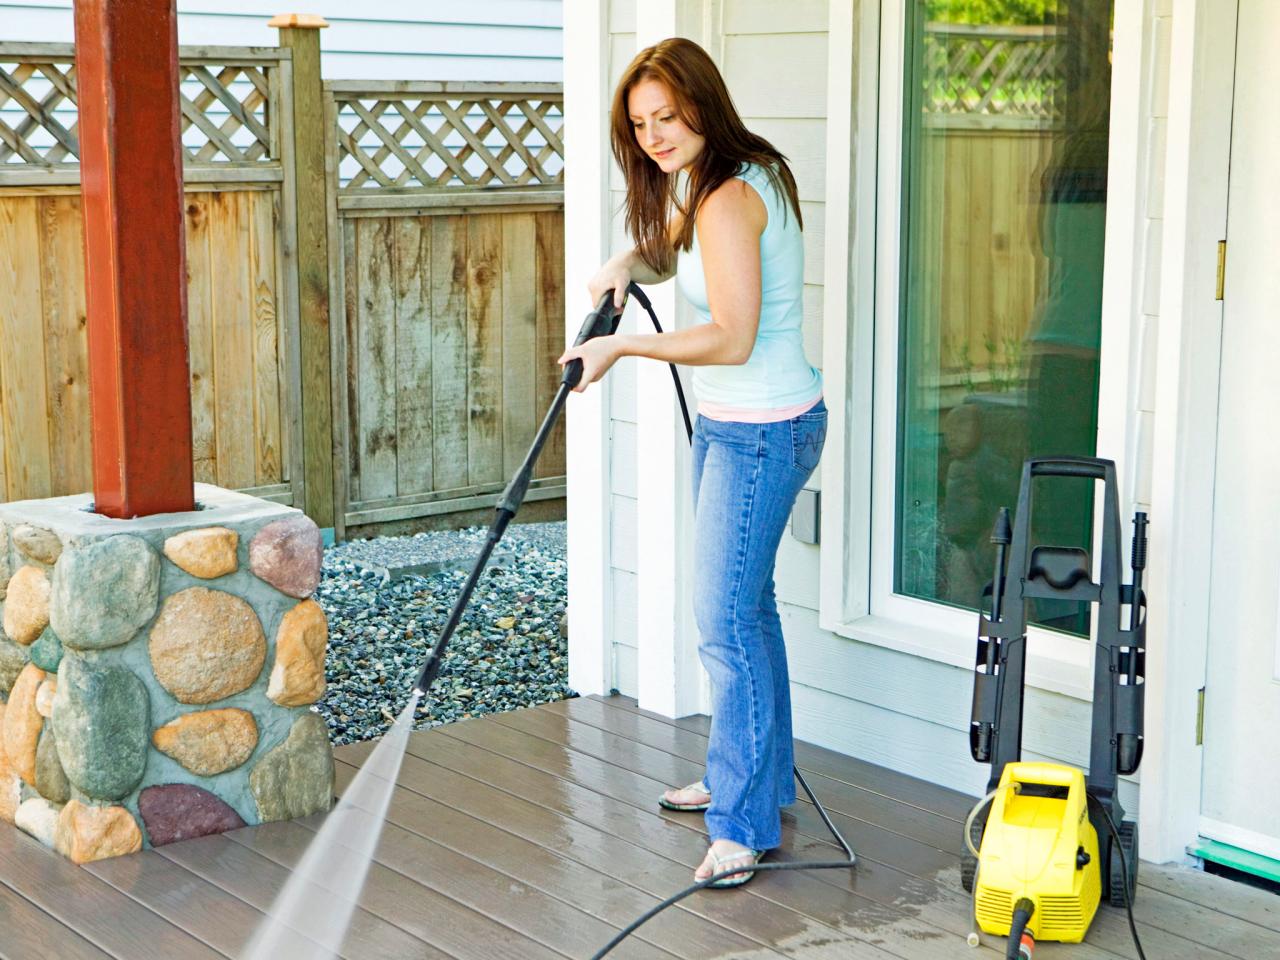 pressure washing and exterior cleaning services in Greenwich CT